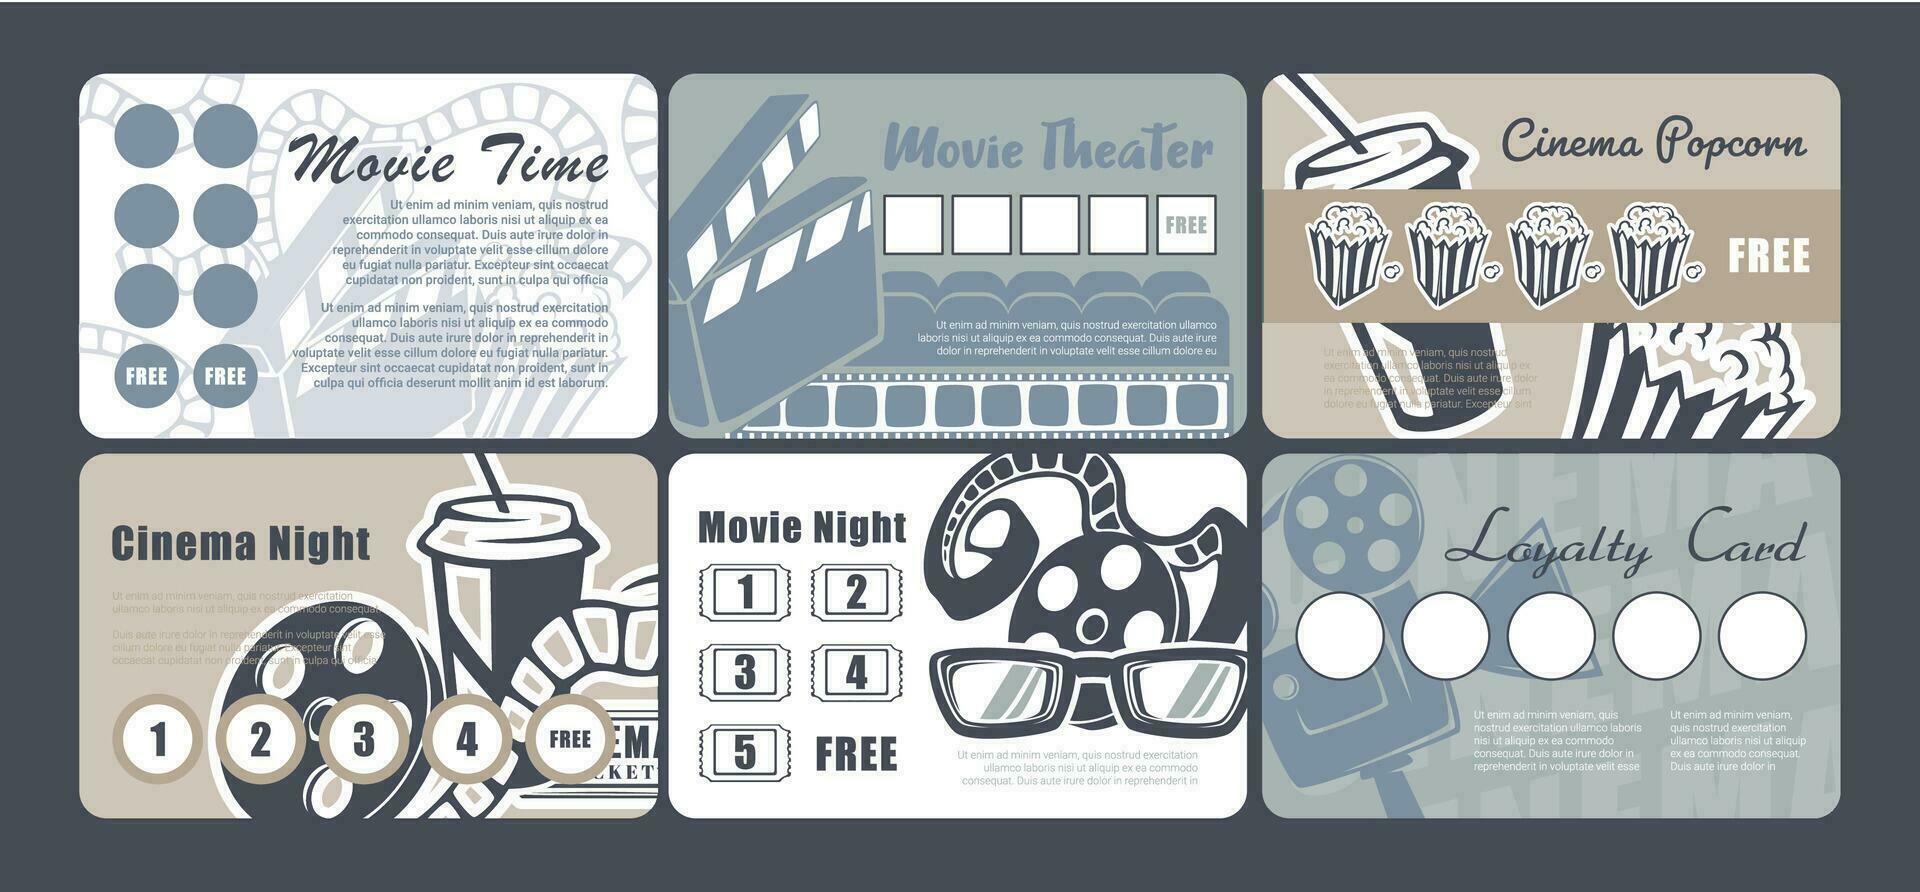 Loyalty card design set for movie theater offers vector